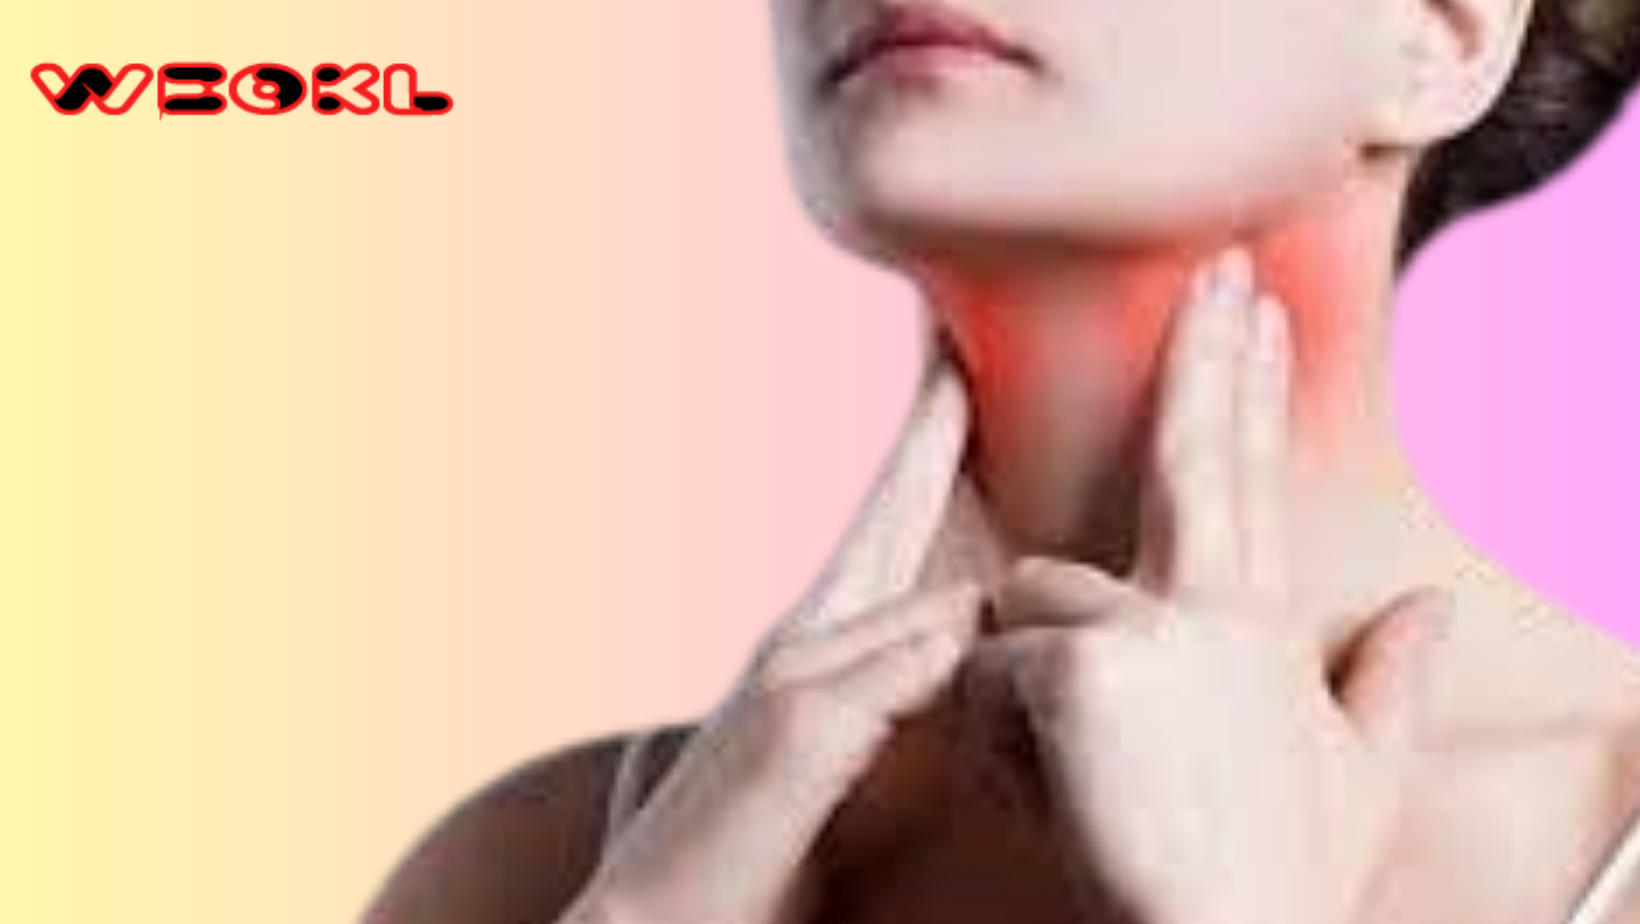 10 Signs You May Have a Thyroid Problem. Read How to Find Out About it And How to Fix it!!